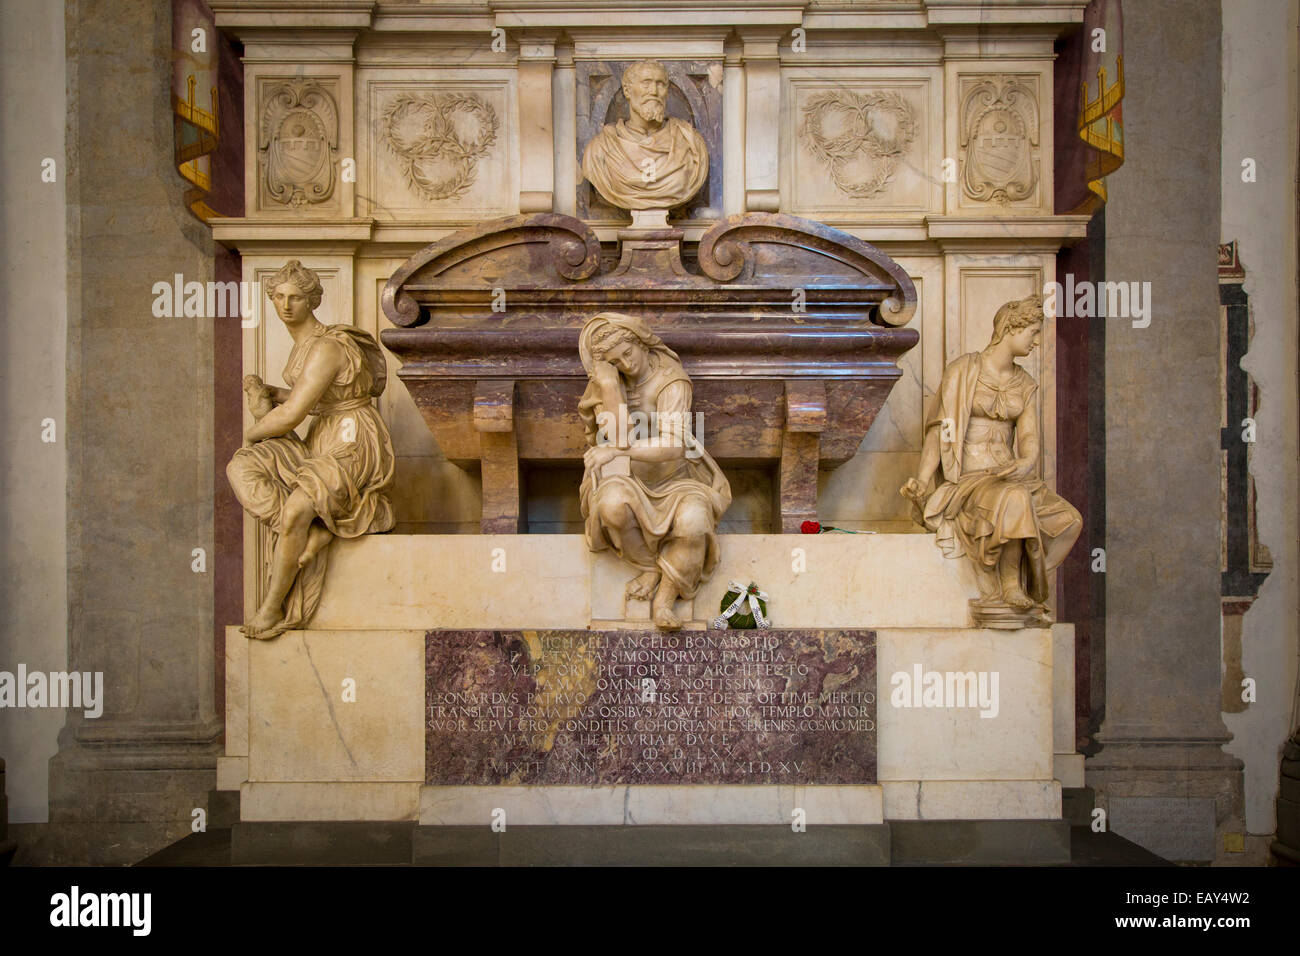 Ornate tomb of Michelangelo inside the church of Santa Croce in Florence Tuscany Italy Stock Photo